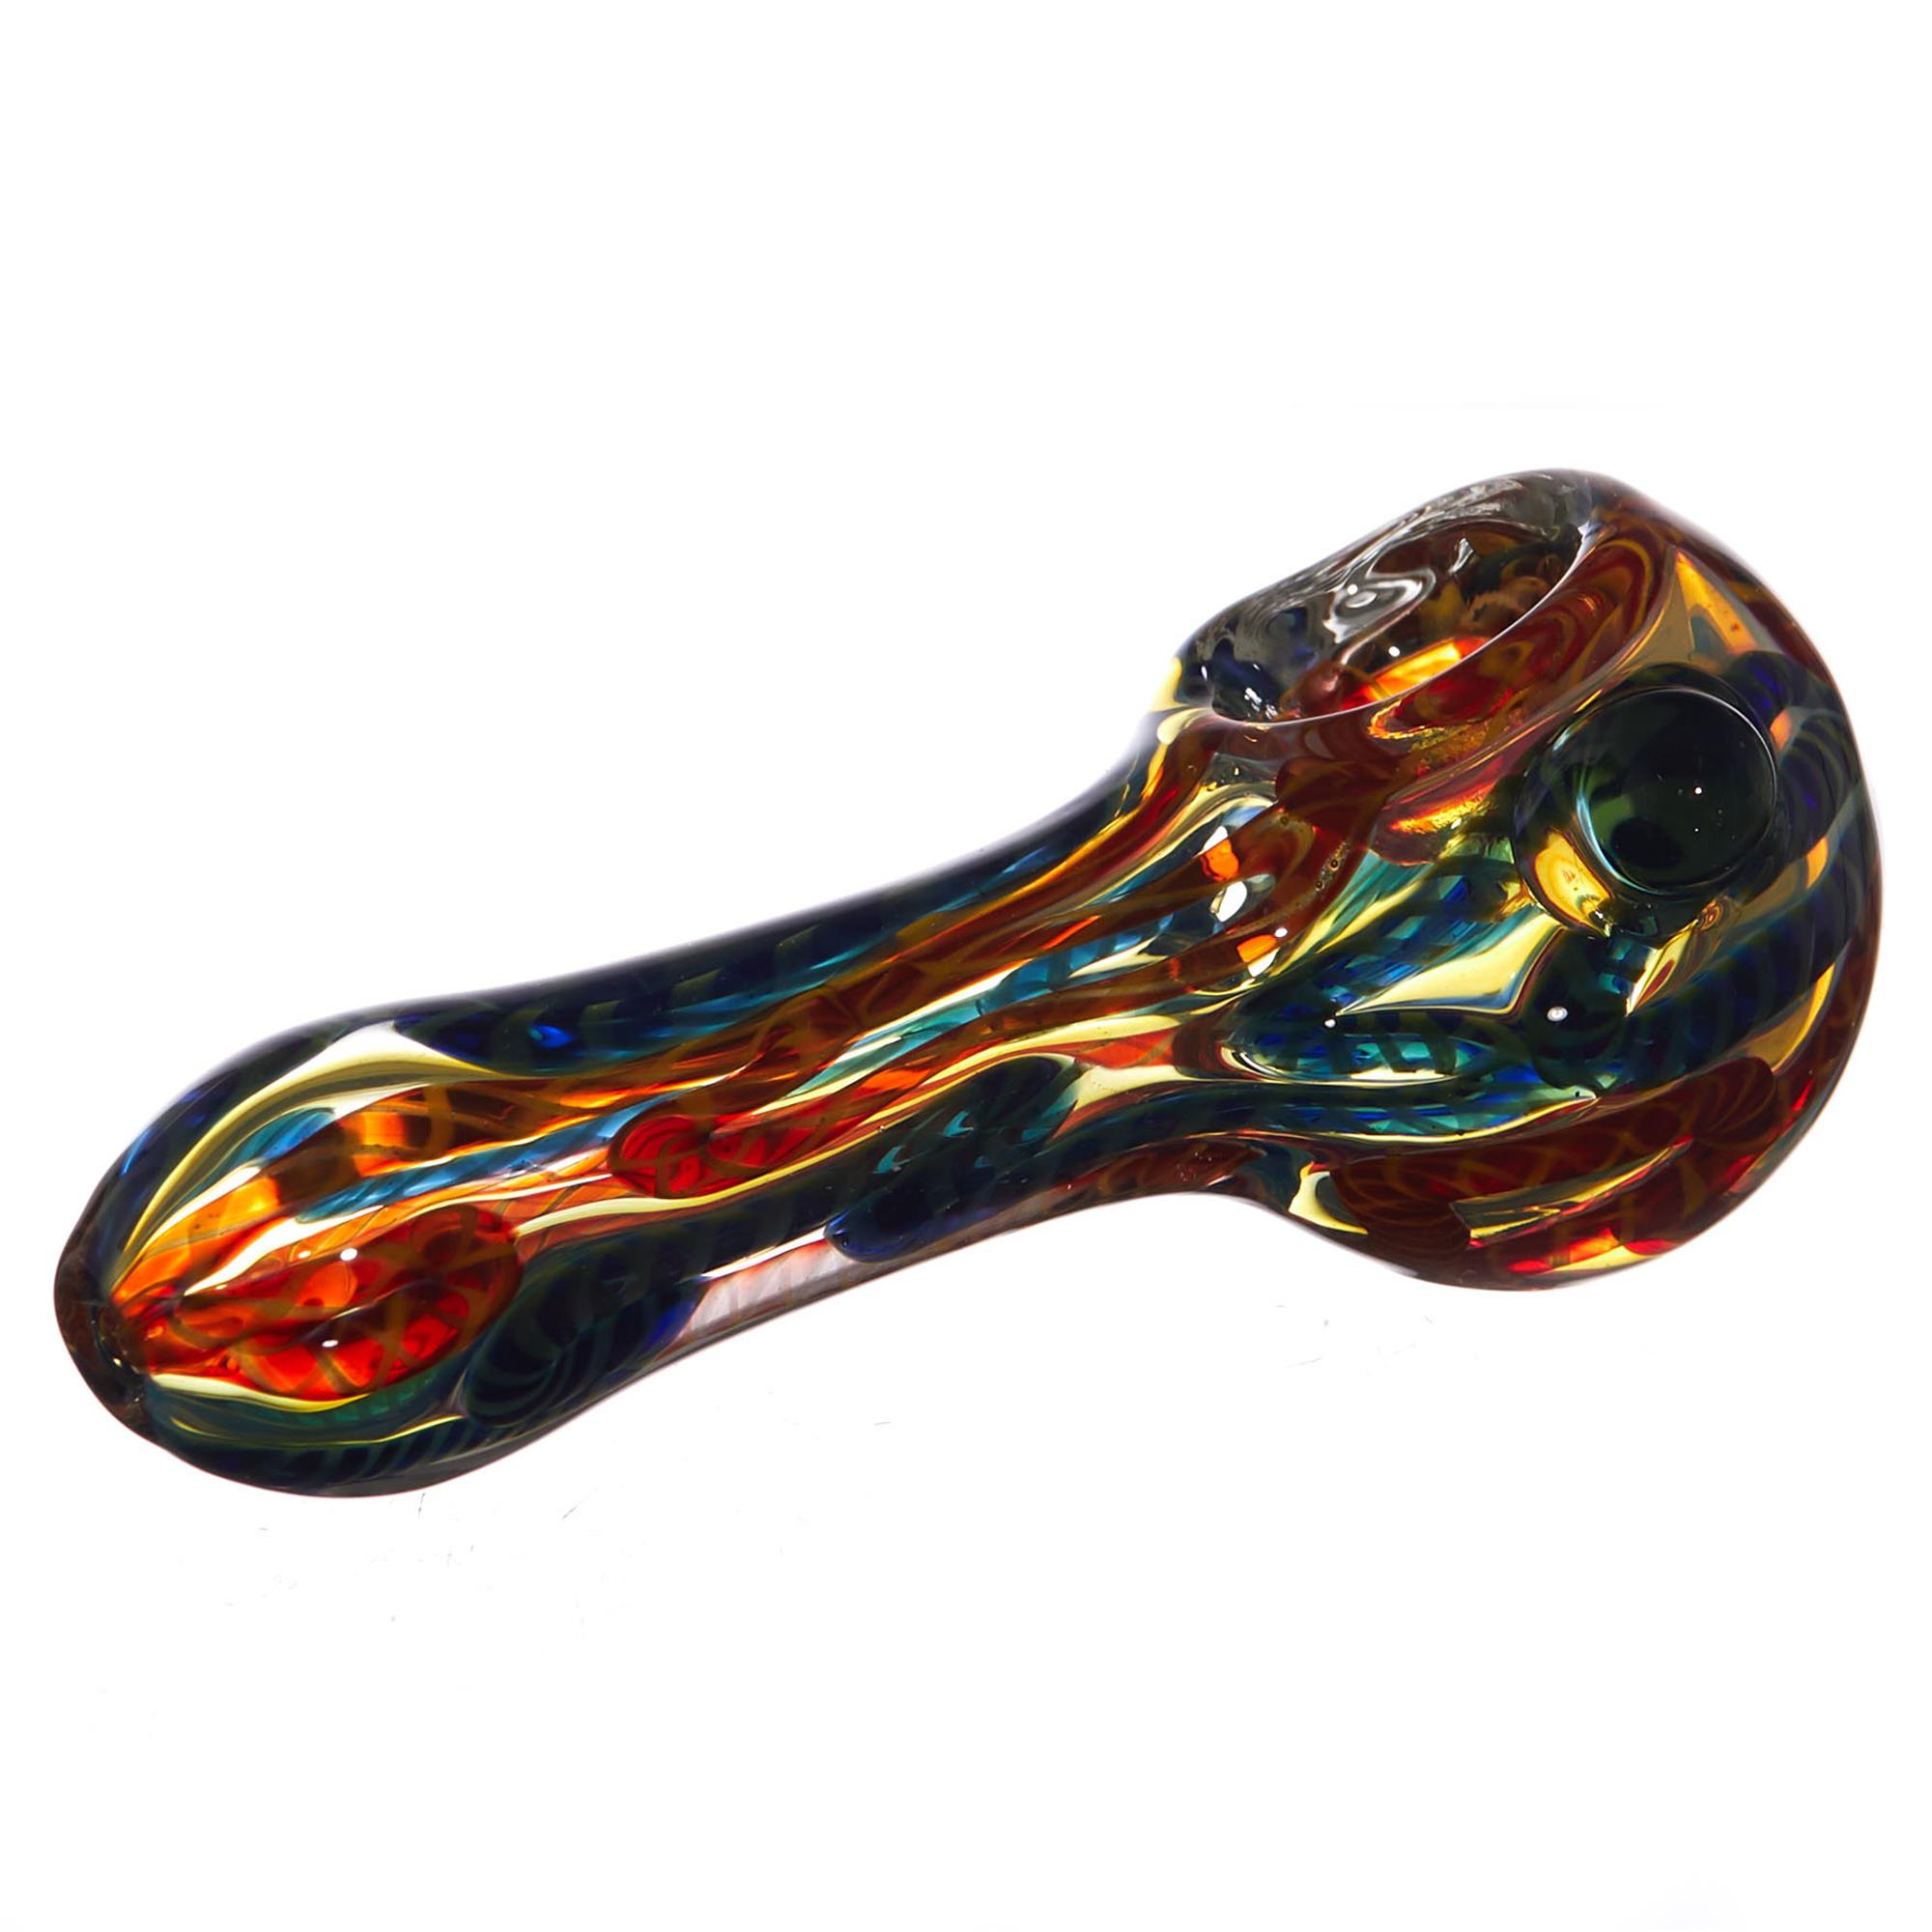 UP IN SMOKE SPOON PIPE